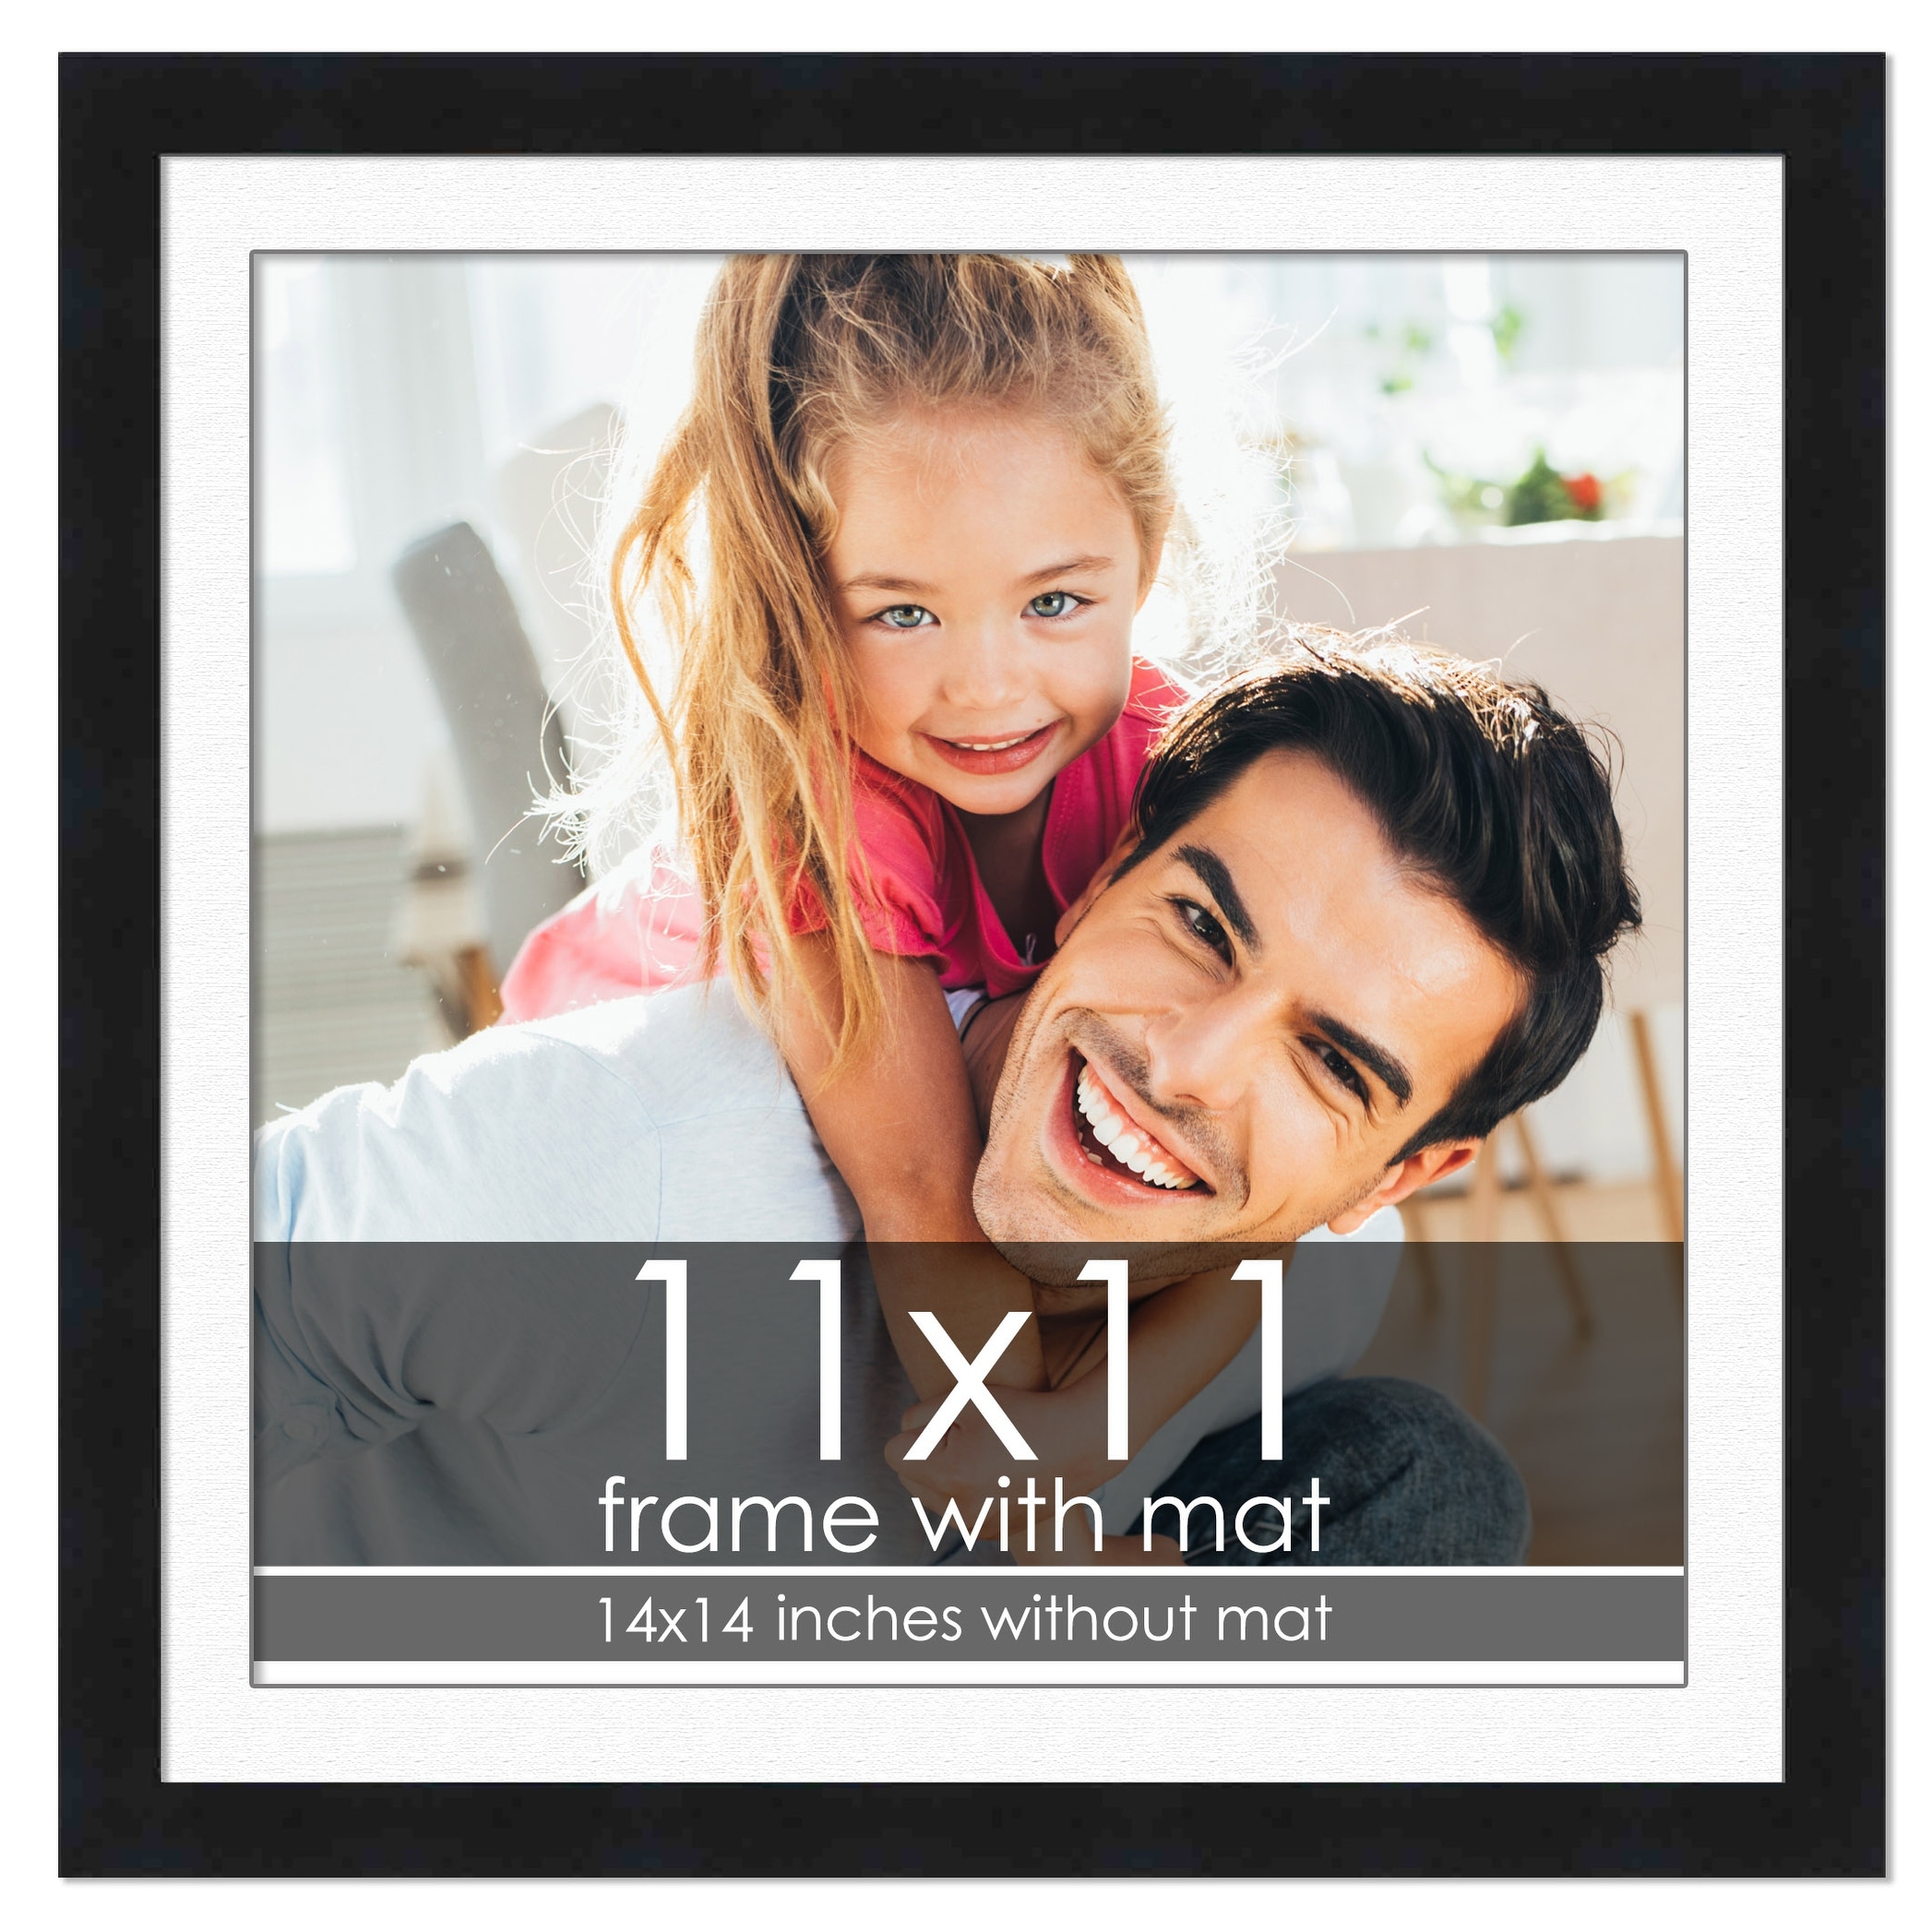 8x8 Frame with Mat - Silver 11x11 Frame Wood Made to Display Print